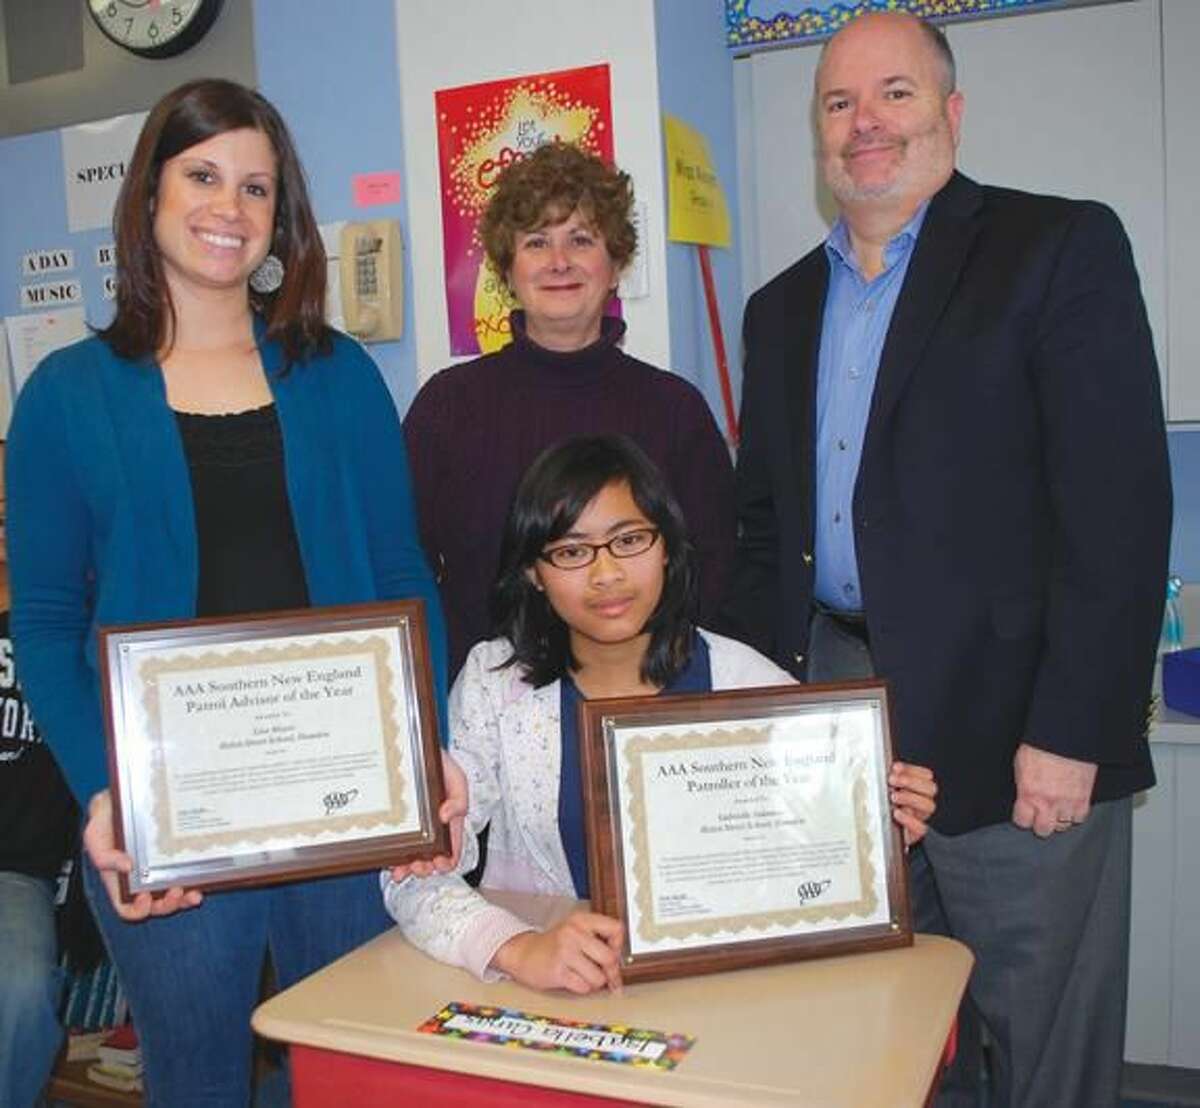 Submitted photo by Adam Bartocetti, Helen Street School Gabrielle Sukmono, seated, a Helen Street School sixth grader, has been named AAA Southern New England’s School Patroller of the Year. The patrol advisor, Lisa Meyer, standing at left, has also been named AAA’s School Advisor of the Year. Fran Mayko, AAA Public Affairs Manager, center, presented plaques to Ms. Meyer and Ms. Sukmono during an informal ceremony at the 285 Helen Street School. At right is Principal Michael Lorenzo.